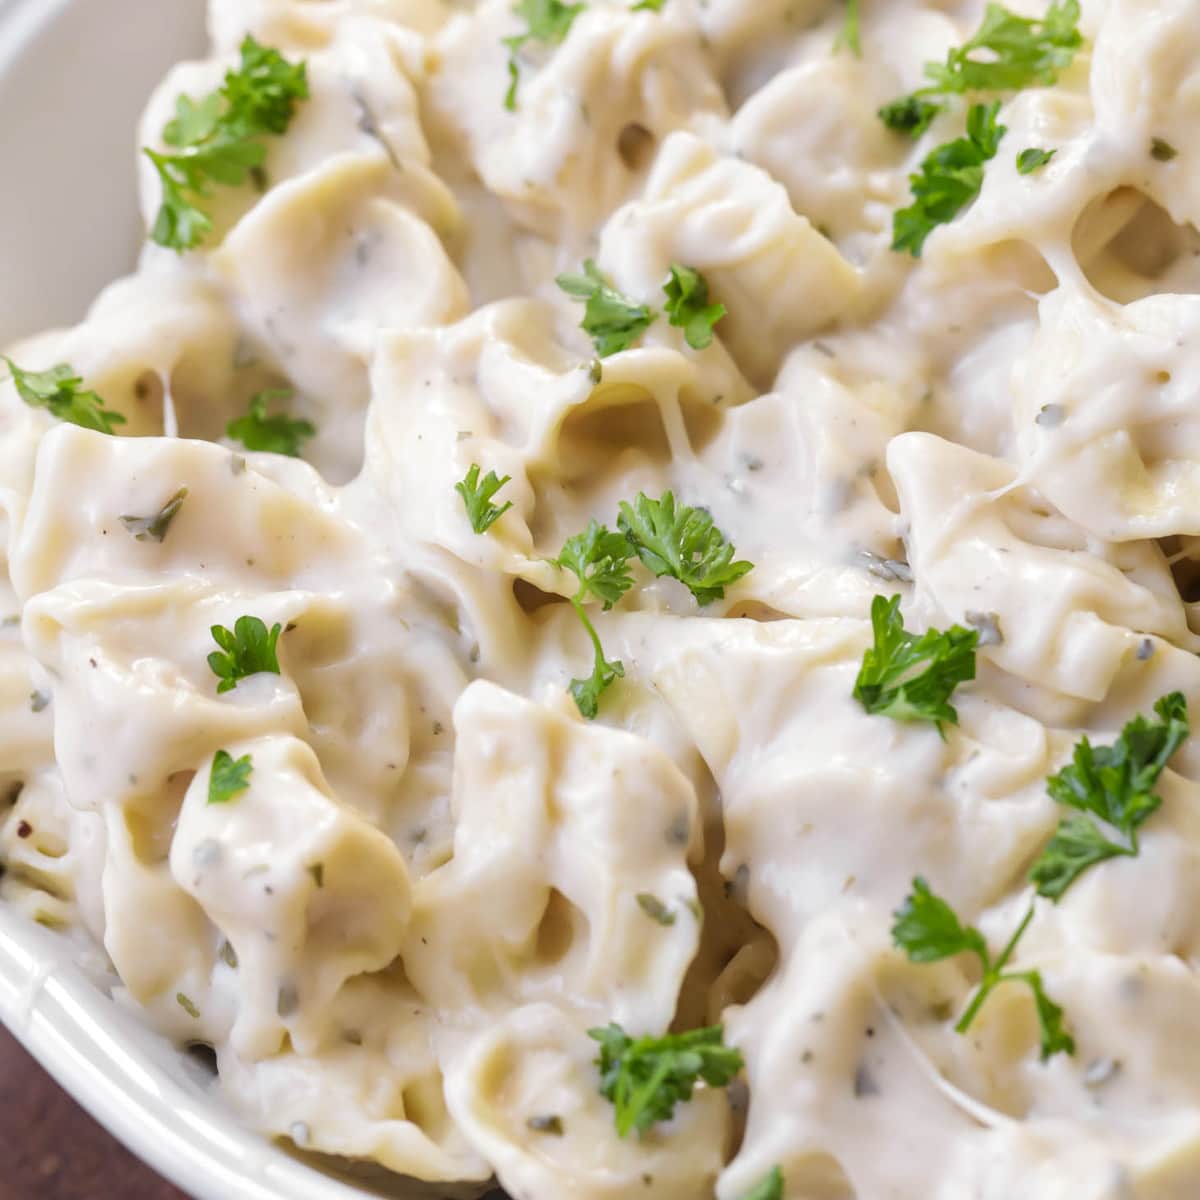 Quick dinner ideas - cheesy garlic tortellini pasta topped with fresh herbs.